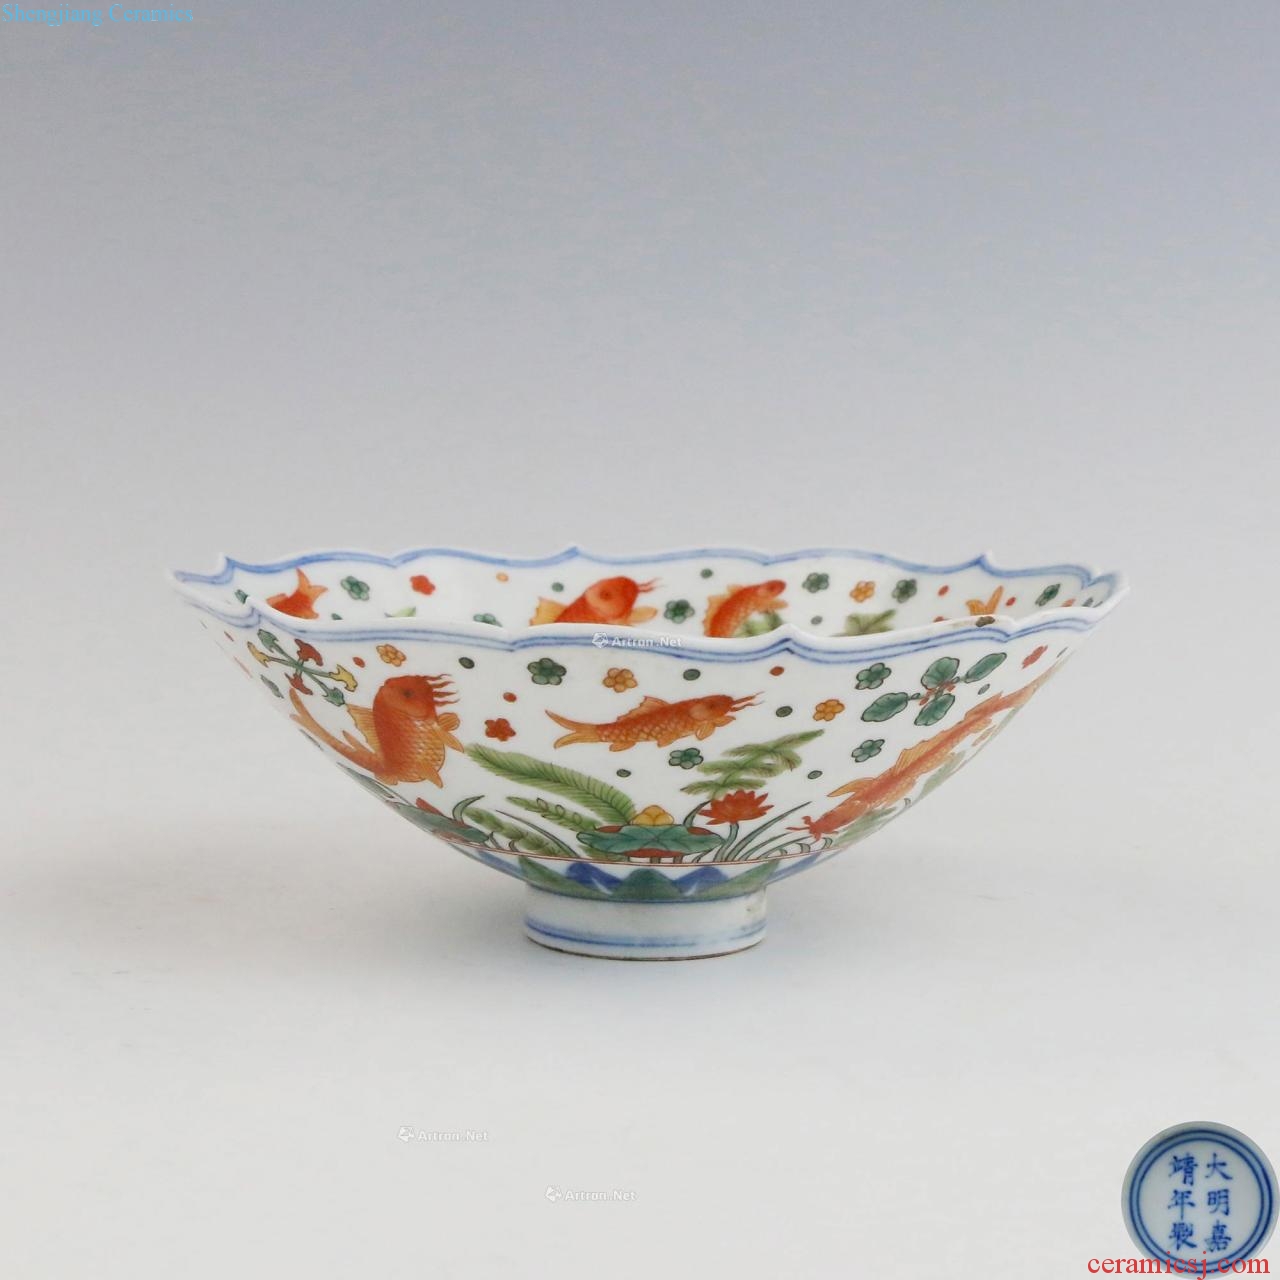 Bright, colorful fish grain kwai mouth hat to bowl